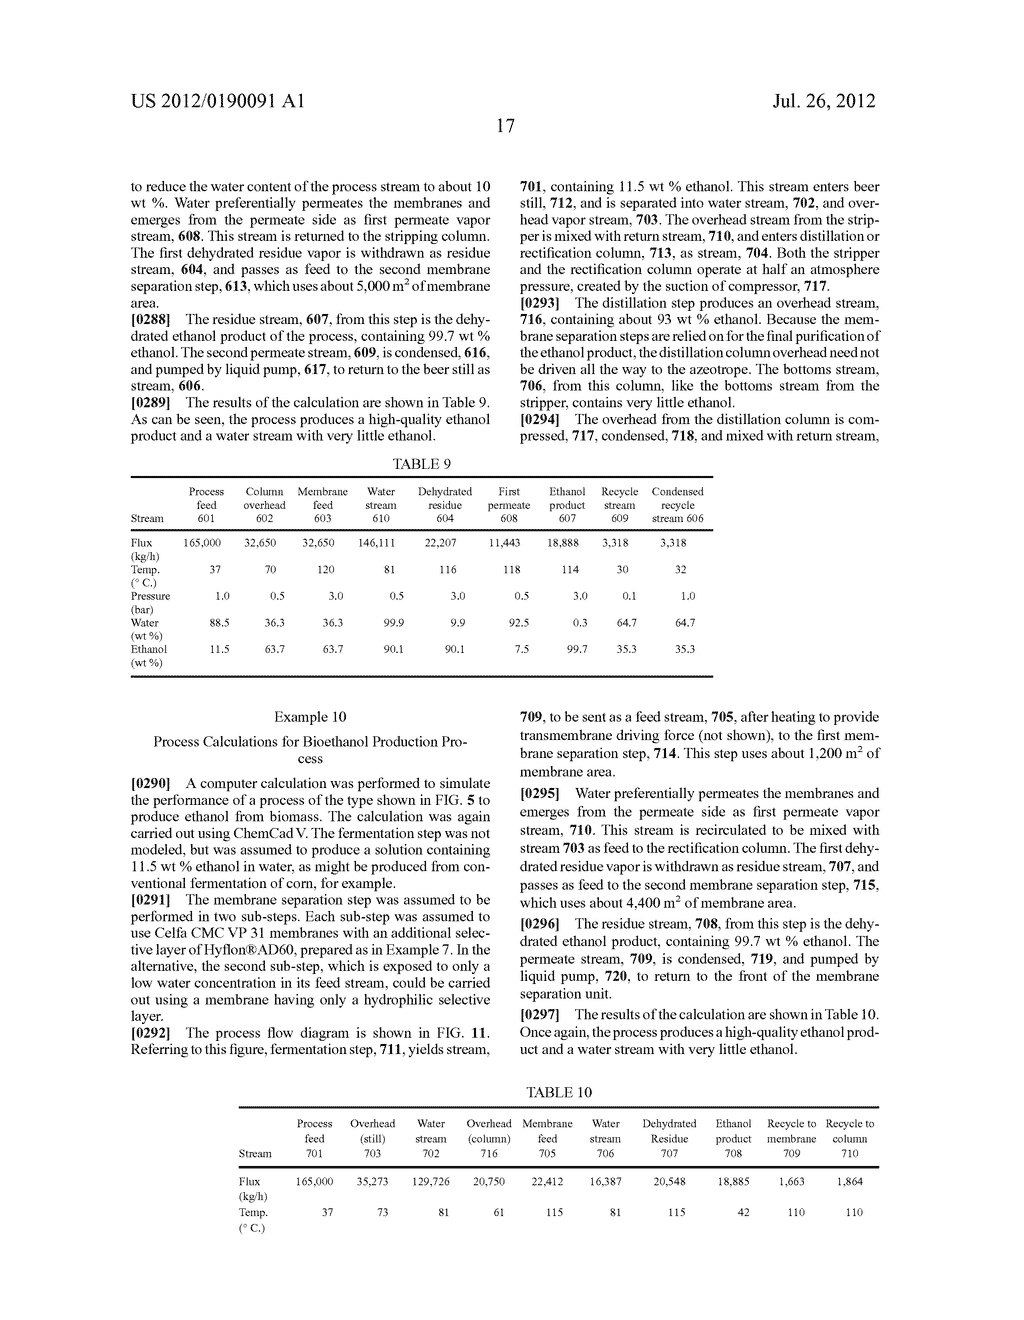 LIQUID-PHASE AND VAPOR-PHASE DEHYDRATION OF ORGANIC / WATER SOLUTIONS - diagram, schematic, and image 32